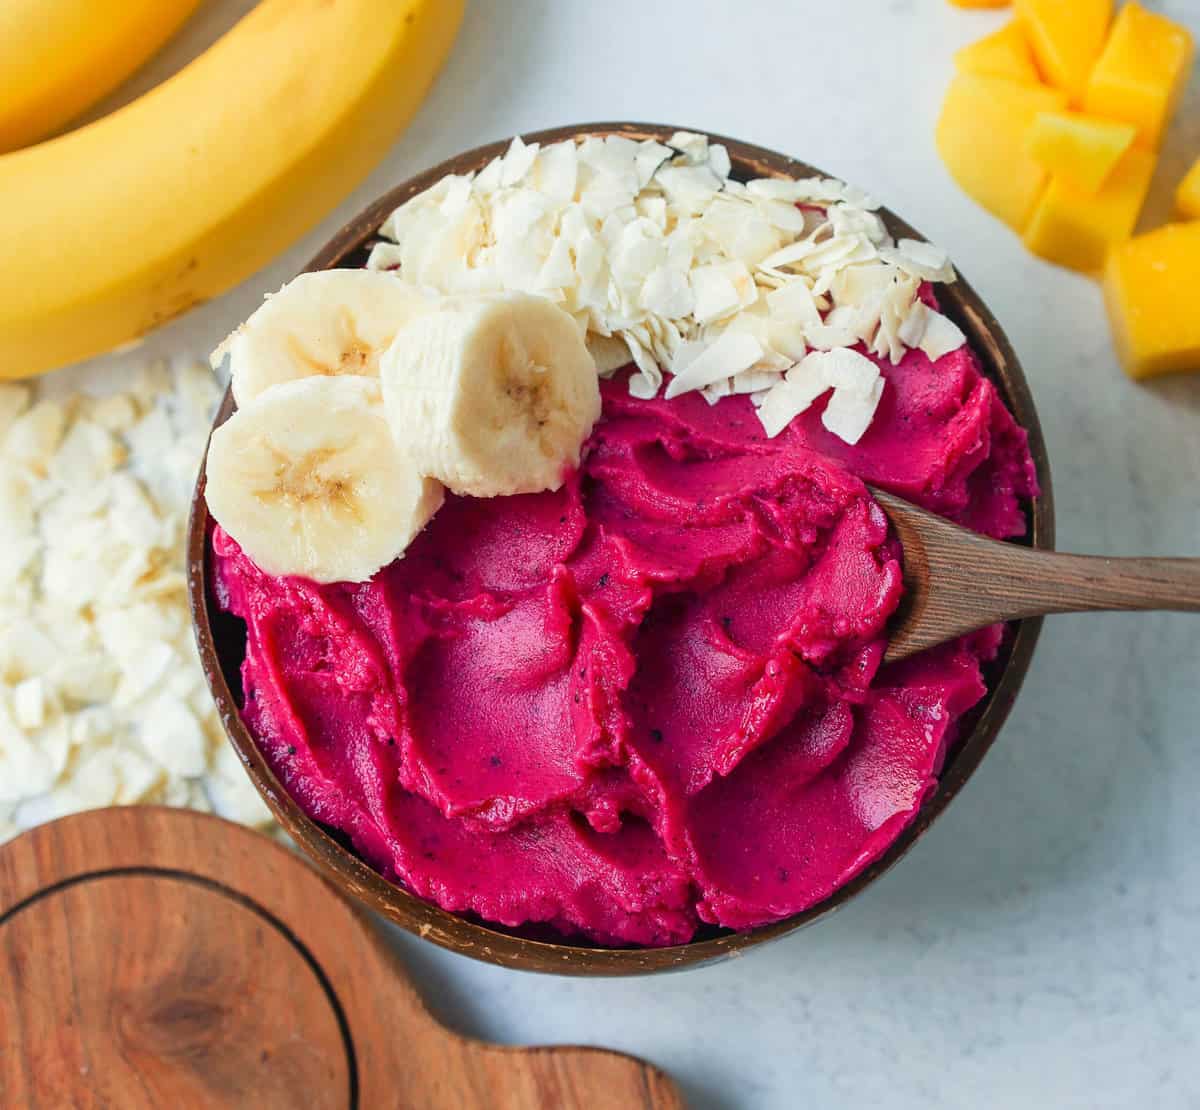 Pitaya Dragonfruit Smoothie Bowl. Dragon fruit (pitaya) smoothie bowls are a creamy frozen blend of tropical fruits topped with granolas, seeds, and other toppings that will give you healthy energy throughout the day. 